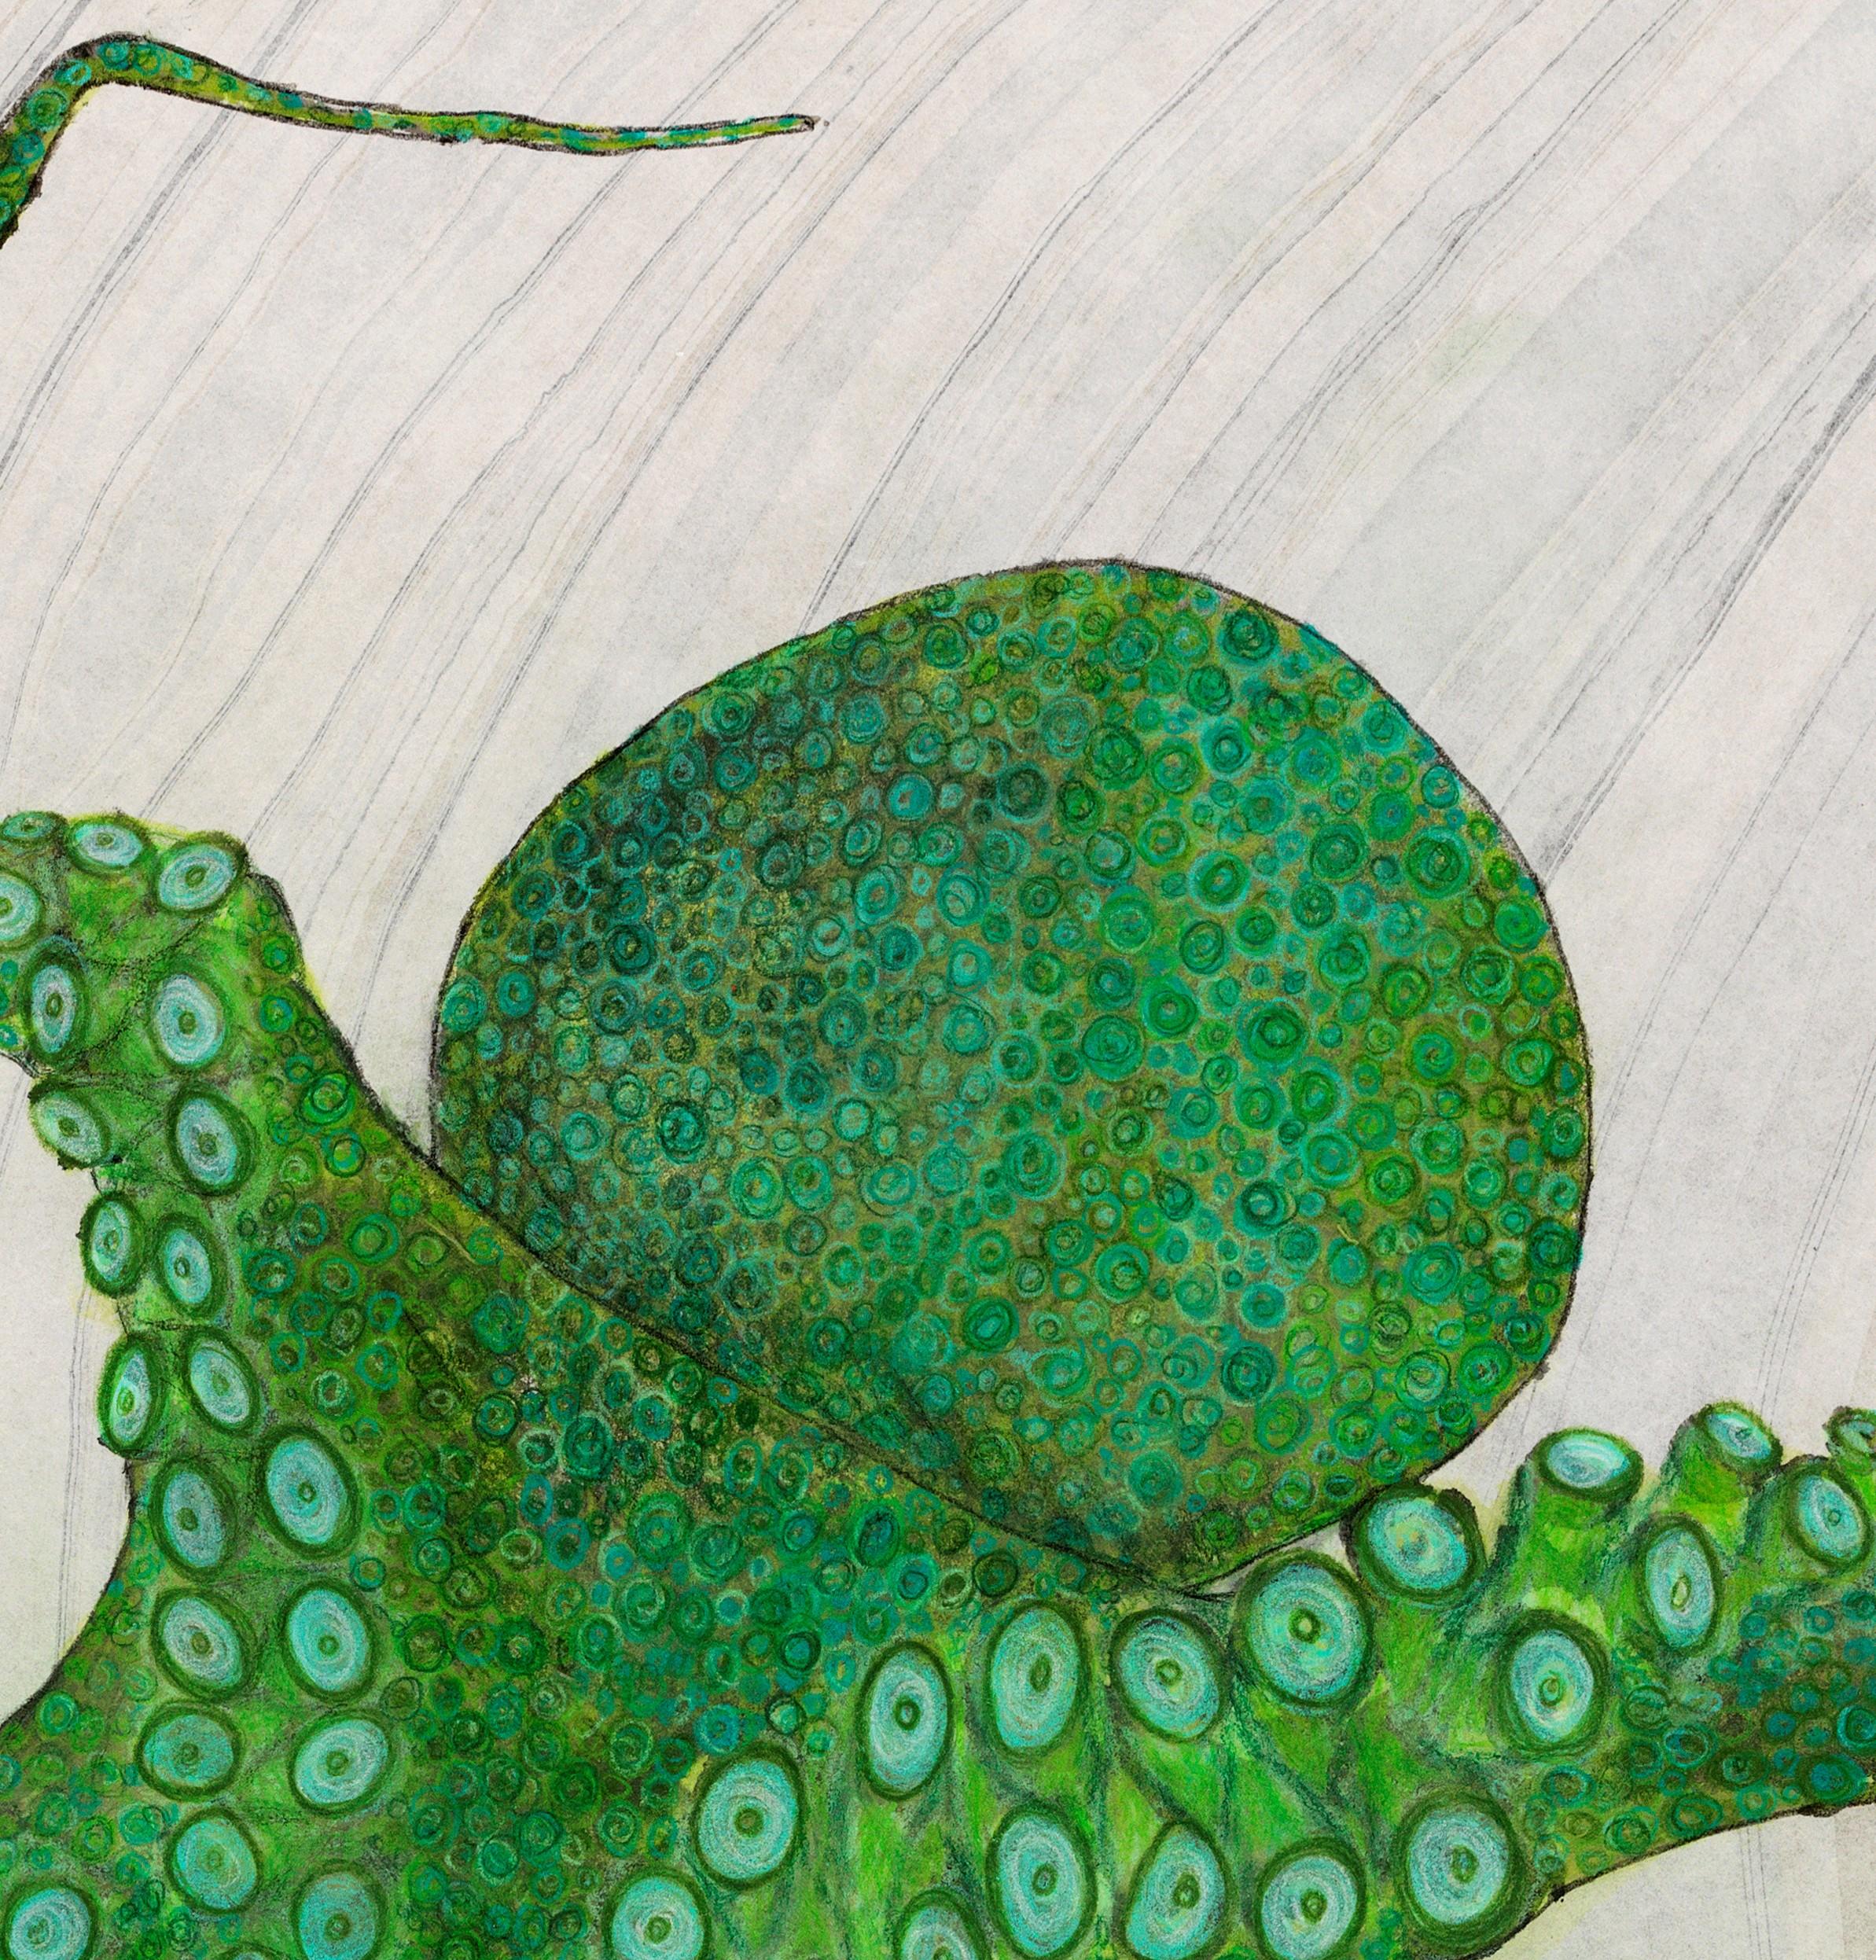 Mint Julep - Gyotaku Style Japanese Sumi Ink Painting, Large Green Octopus - Art by Jeff Conroy